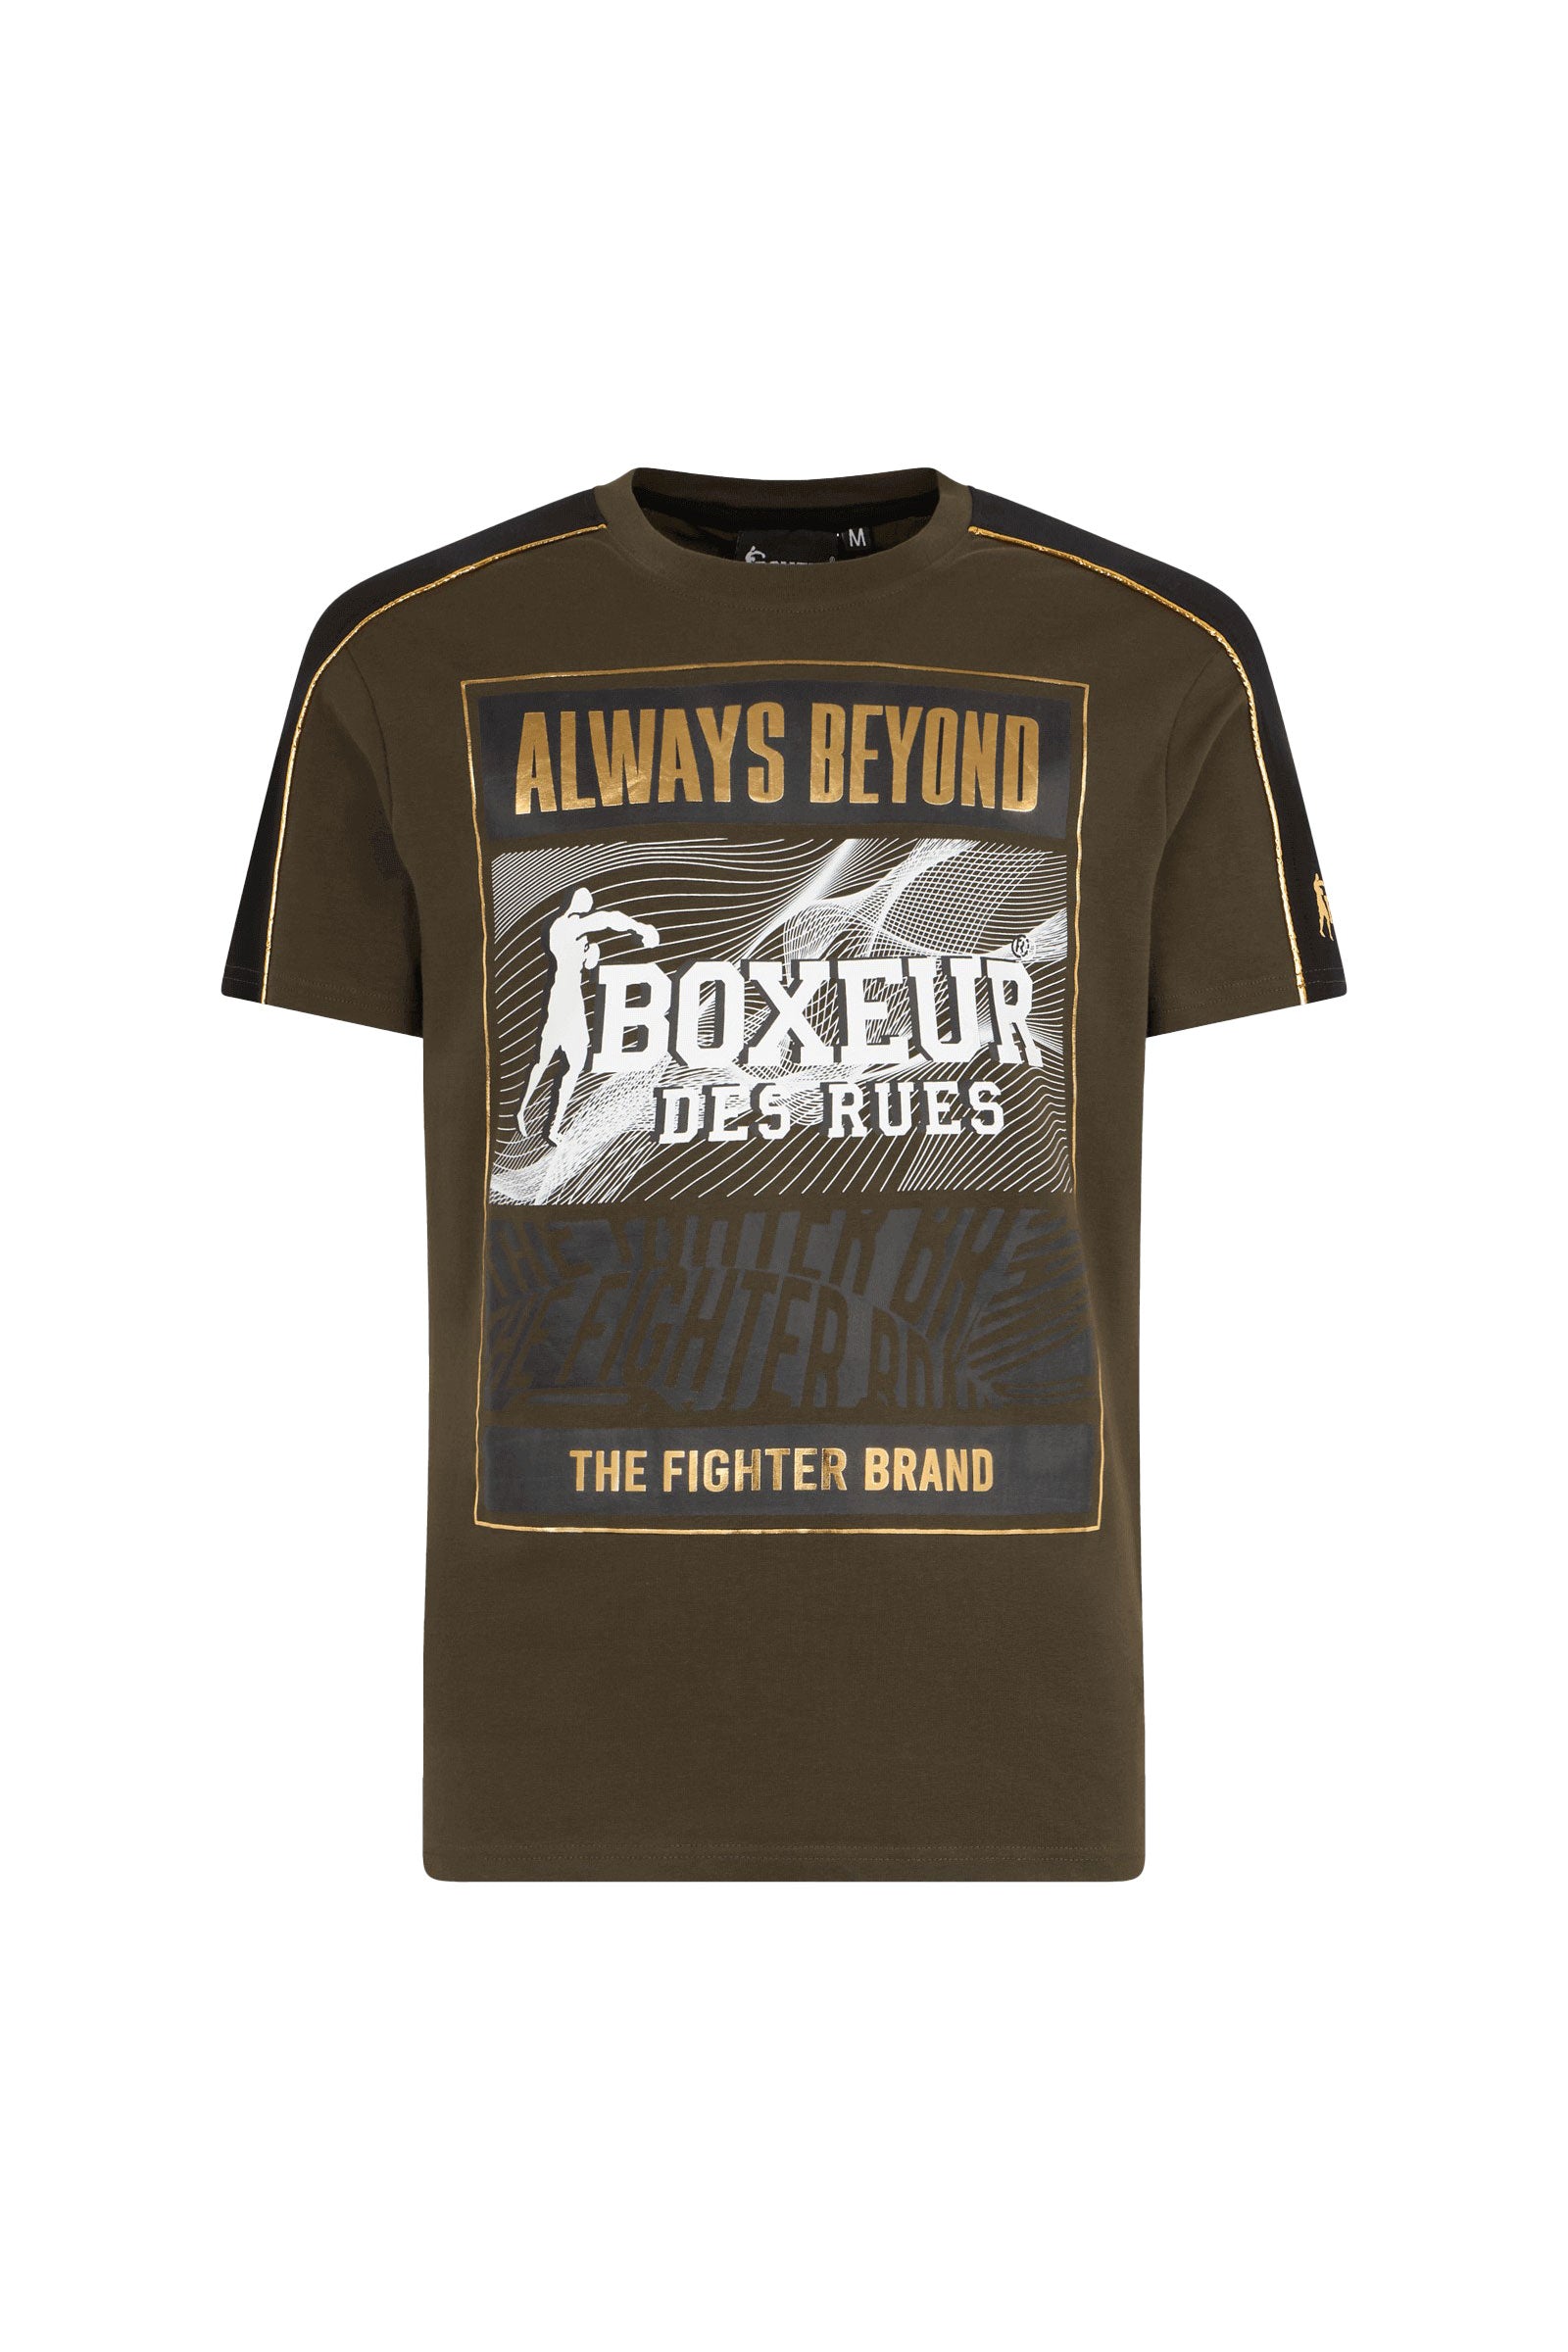 Regular T-Shirt with Print in Army T-Shirts Boxeur des Rues   